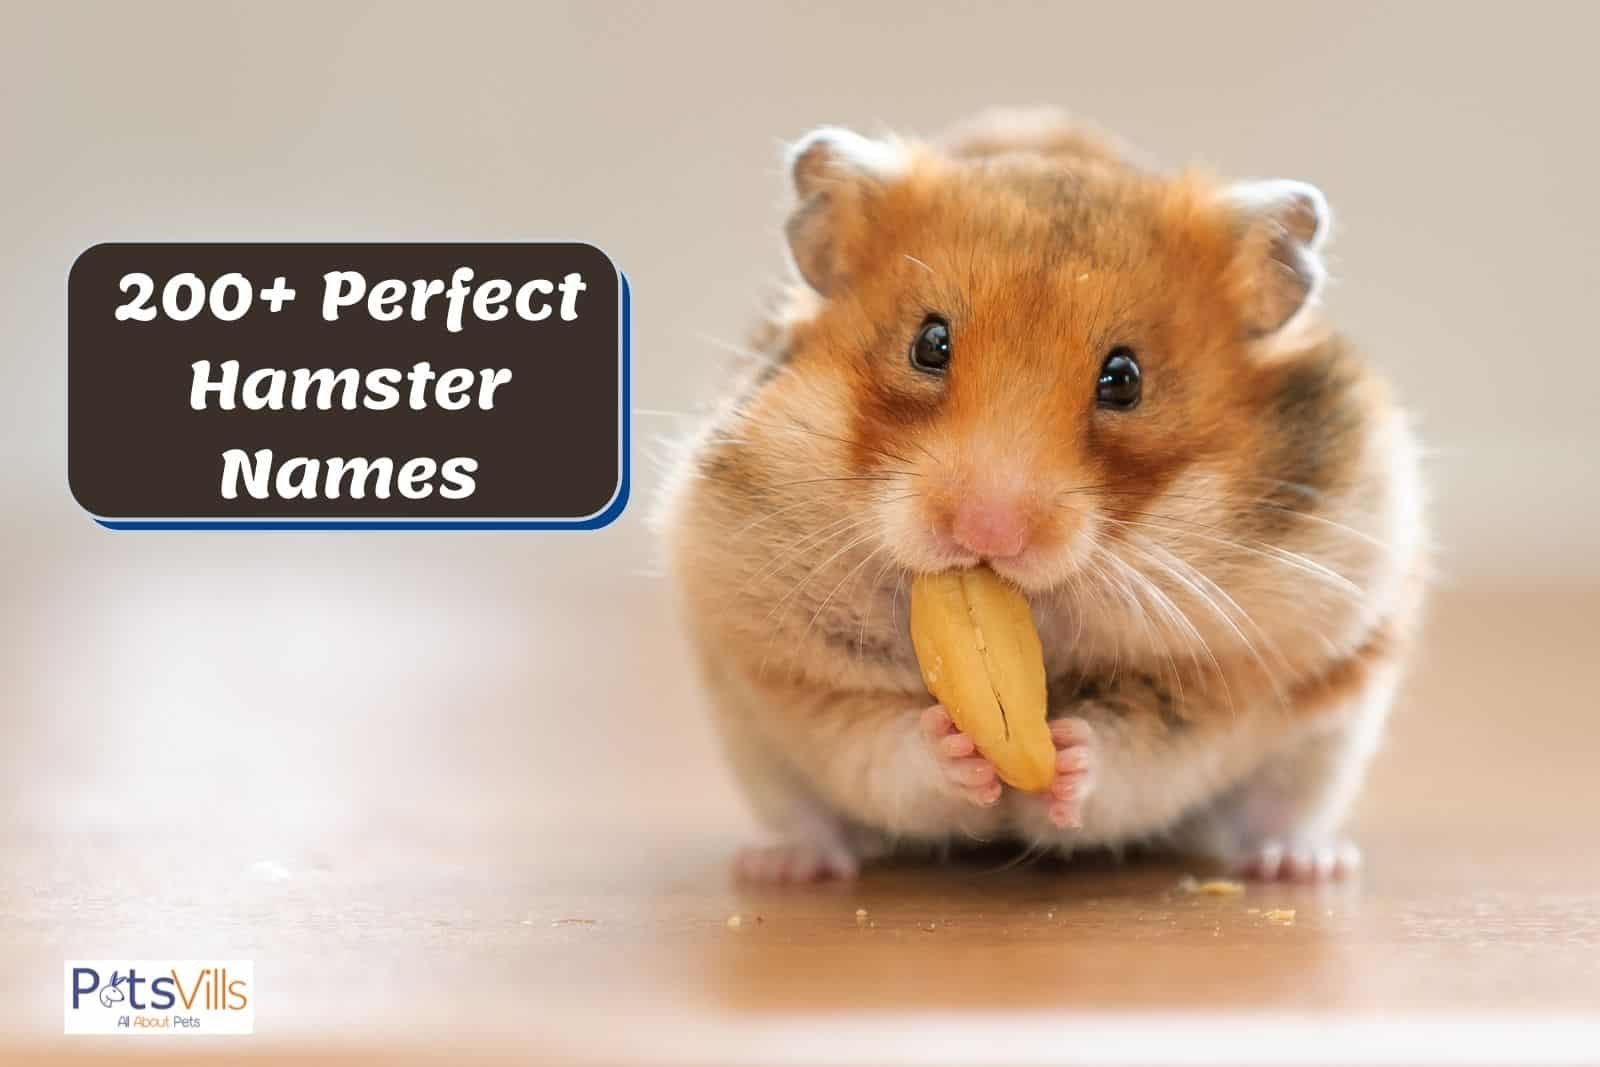 cute hammy eating nuts beside hamster names poster